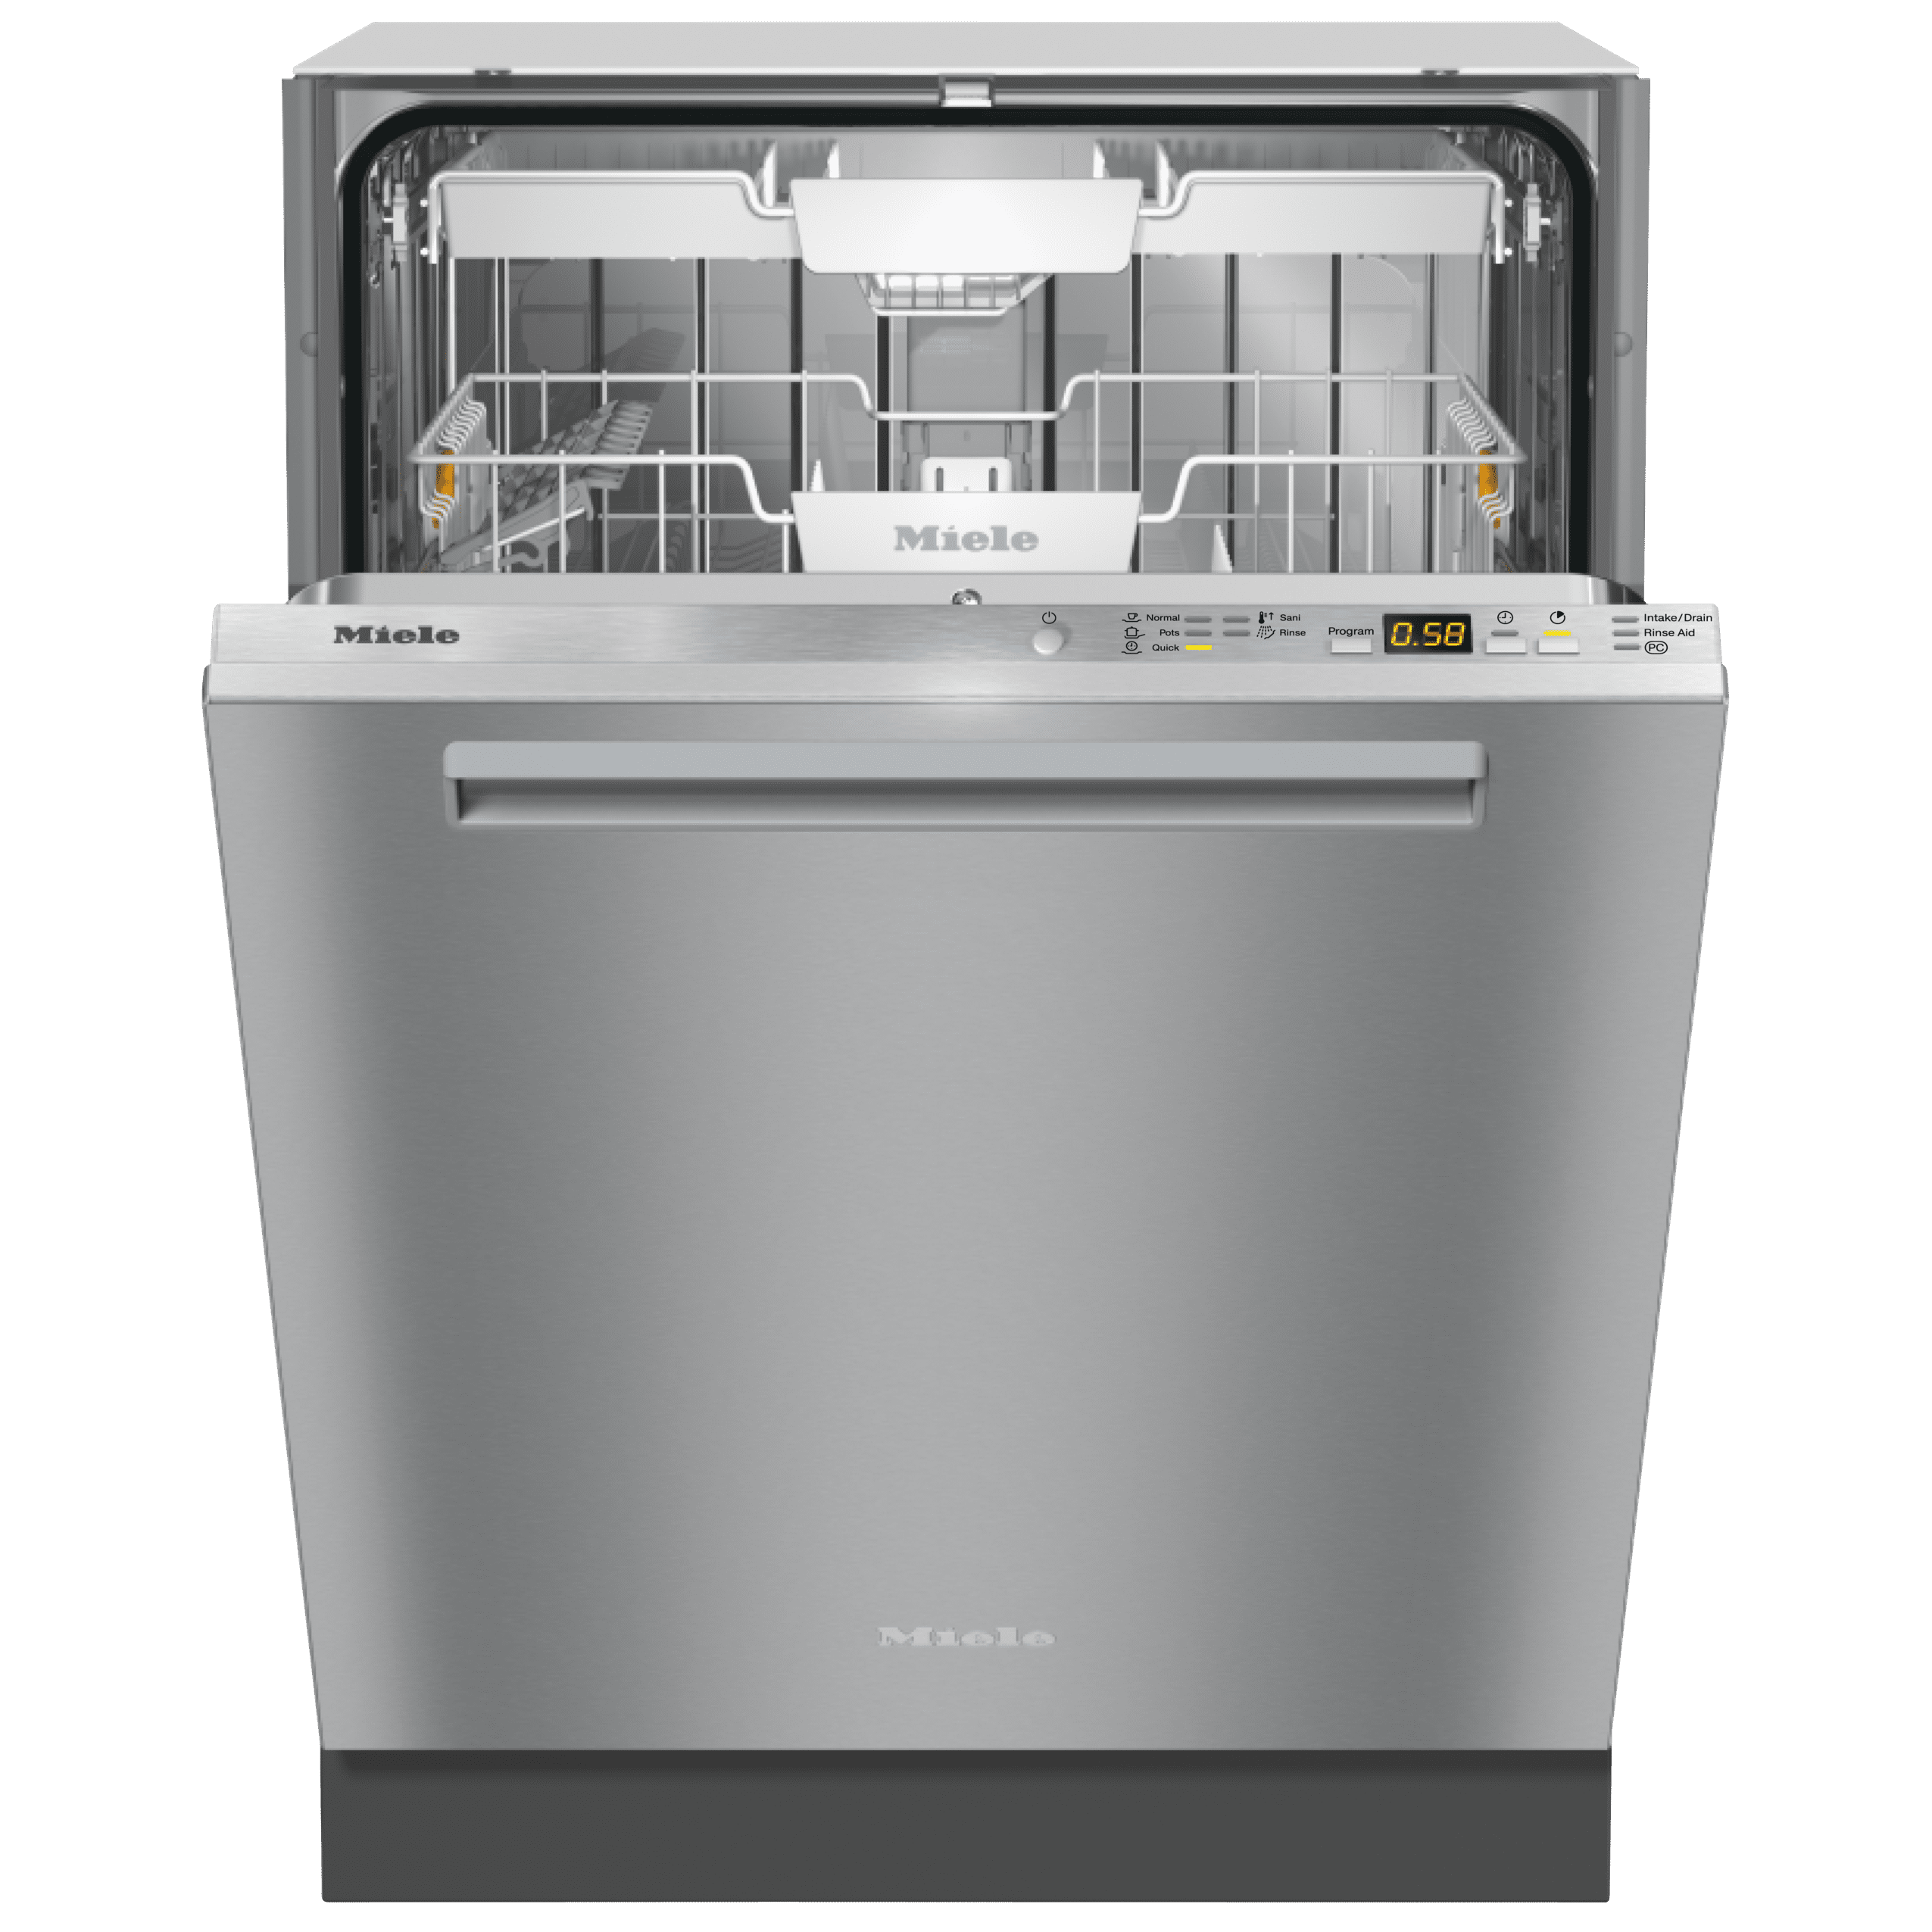 Miele G5056SCVISFP STAINLESS STEEL G 5056 Scvi Sfp - Fully Integrated Dishwashers In Tried-And-Tested Miele Quality At An Affordable Entry-Level Price.